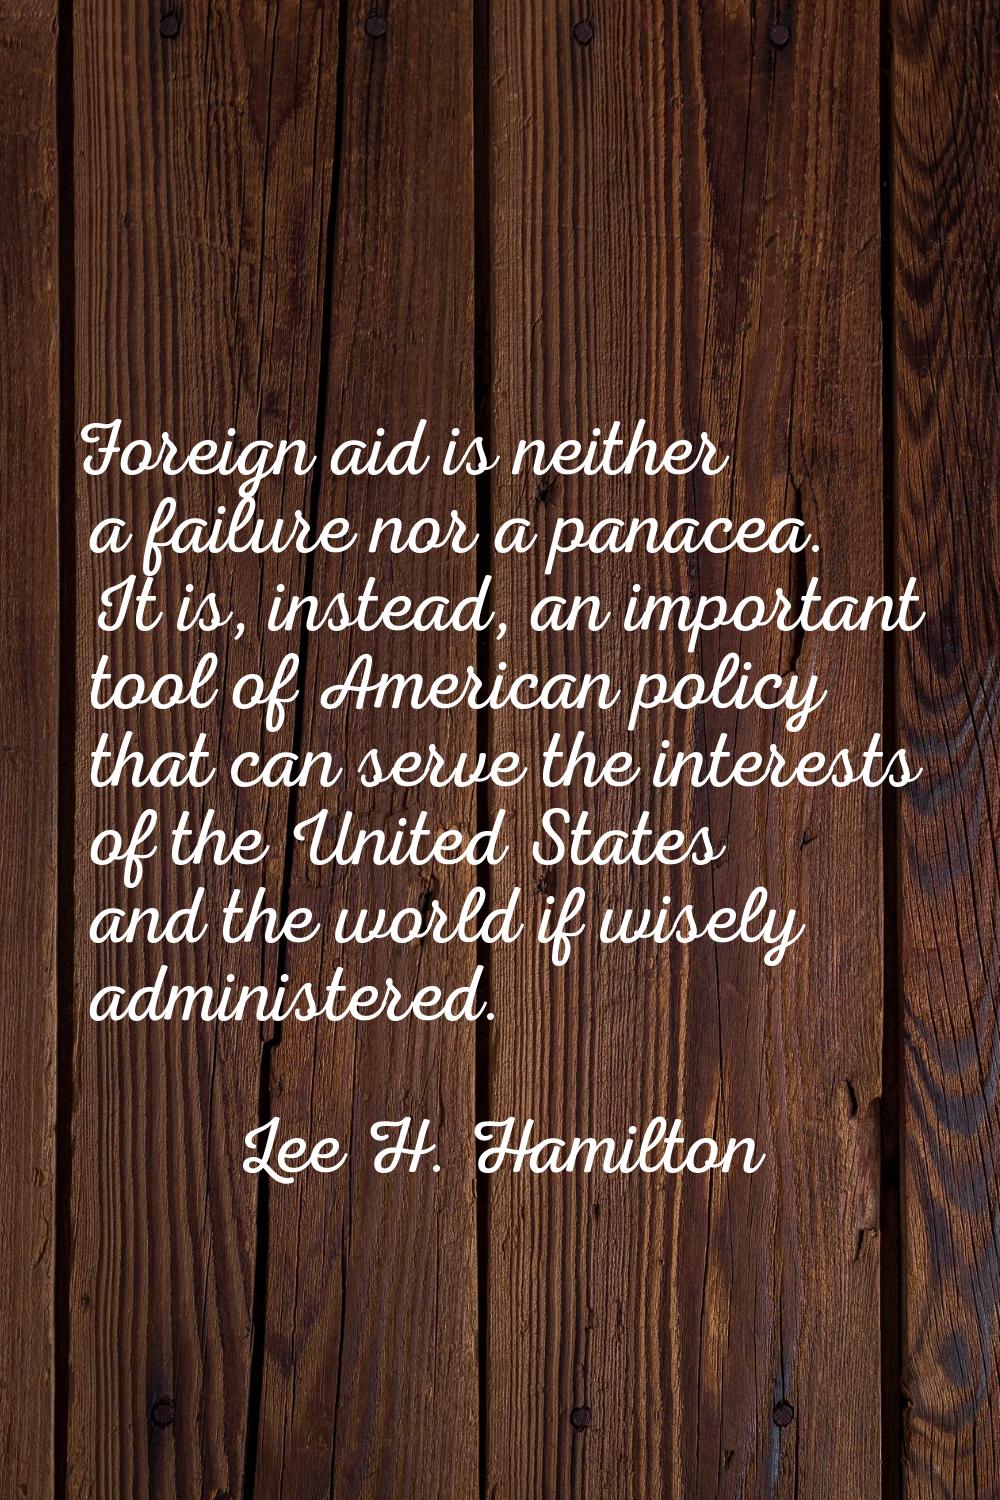 Foreign aid is neither a failure nor a panacea. It is, instead, an important tool of American polic